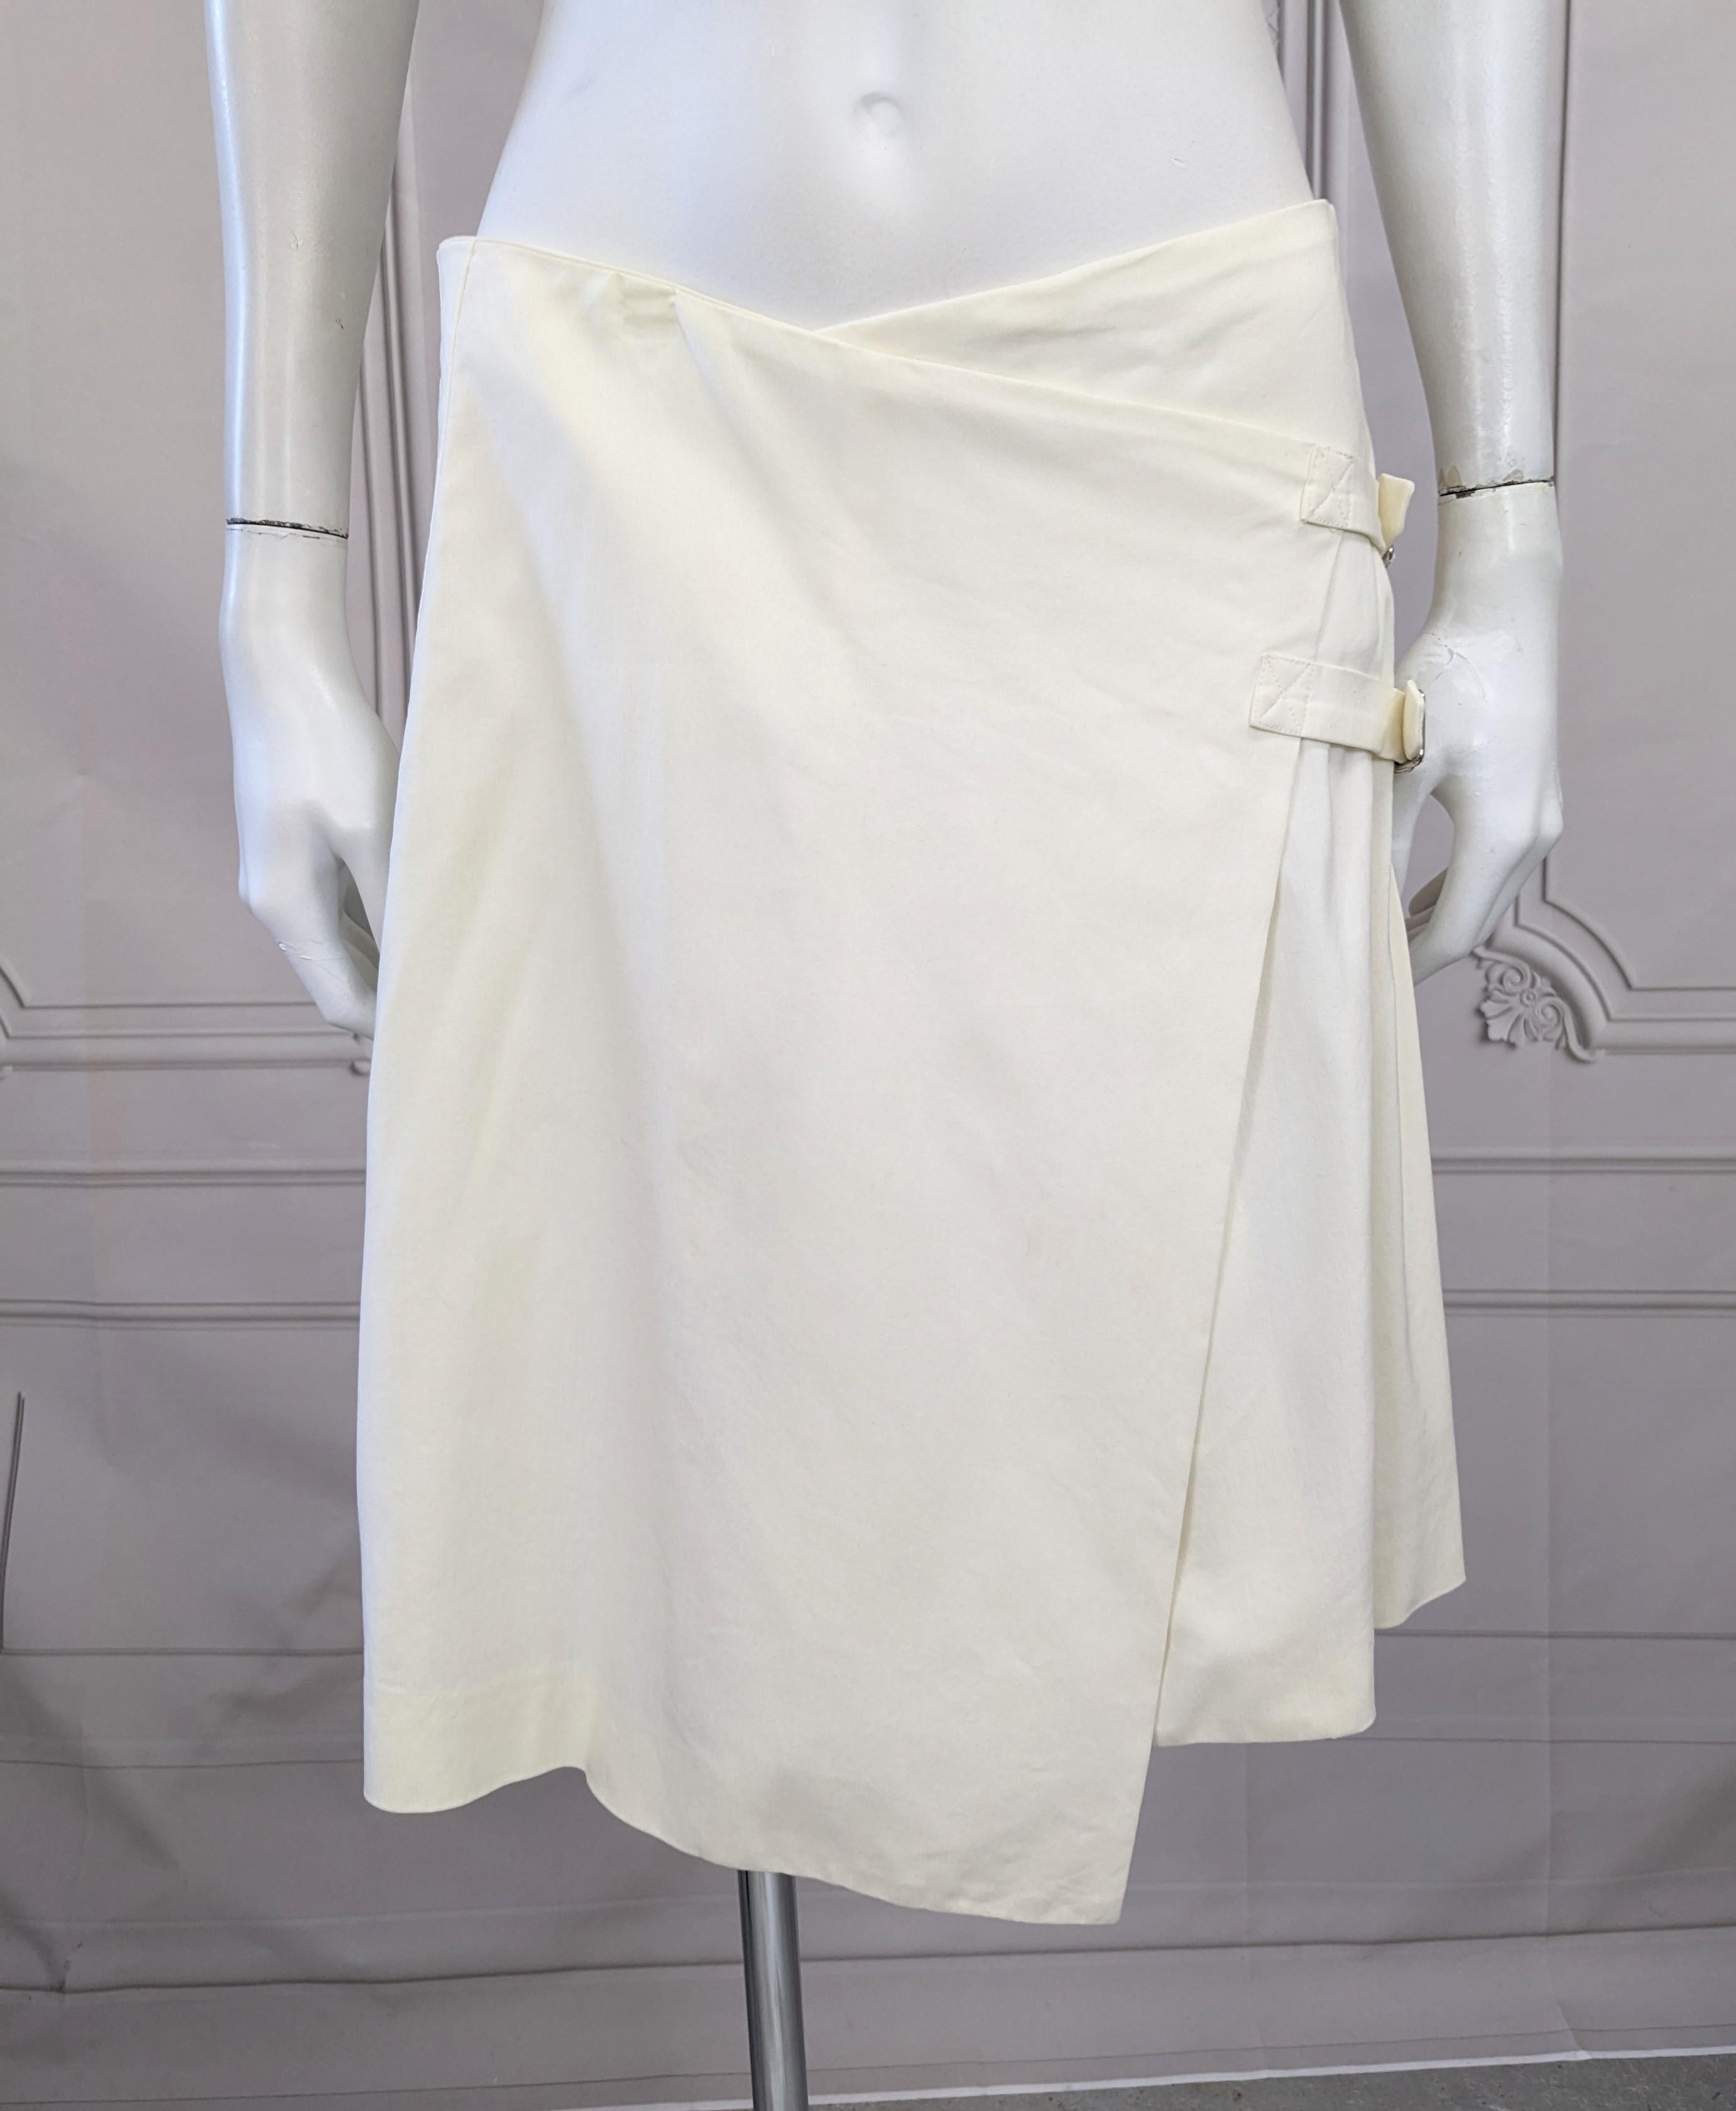 Interesting John Galliano asymmetrical deconstructed white polished rayon stretch twill wrap skirt from Spring/Summer 2000. The wrap style sits on the hips with two self buckle straps which morphs into a box pleated kilt. Excellent Condition, USA 6.